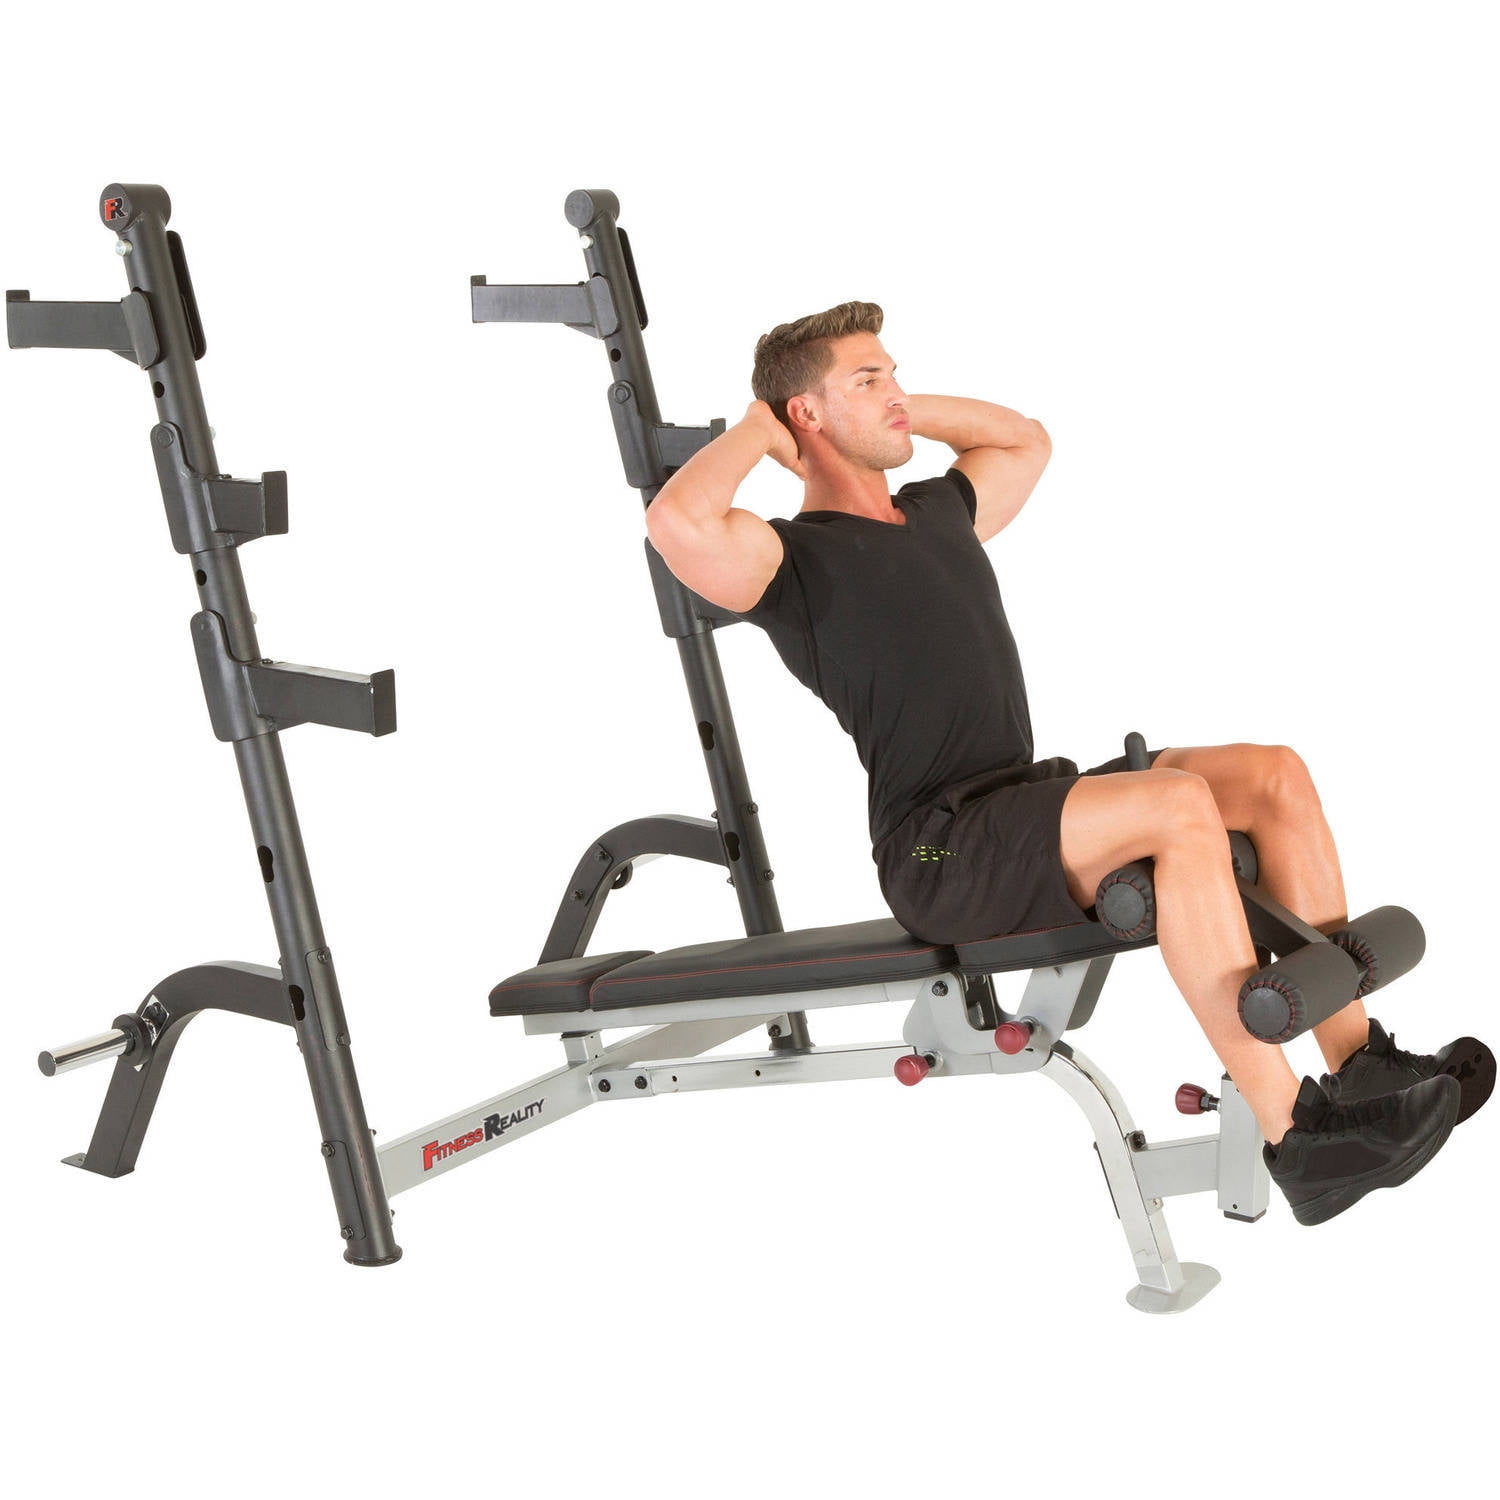 Lil Tag væk Minister HAMMER Weight Bench Solid XP With 76 Kg Dumbbell Set (Ø 30 Mm) |  islamiyyat.com